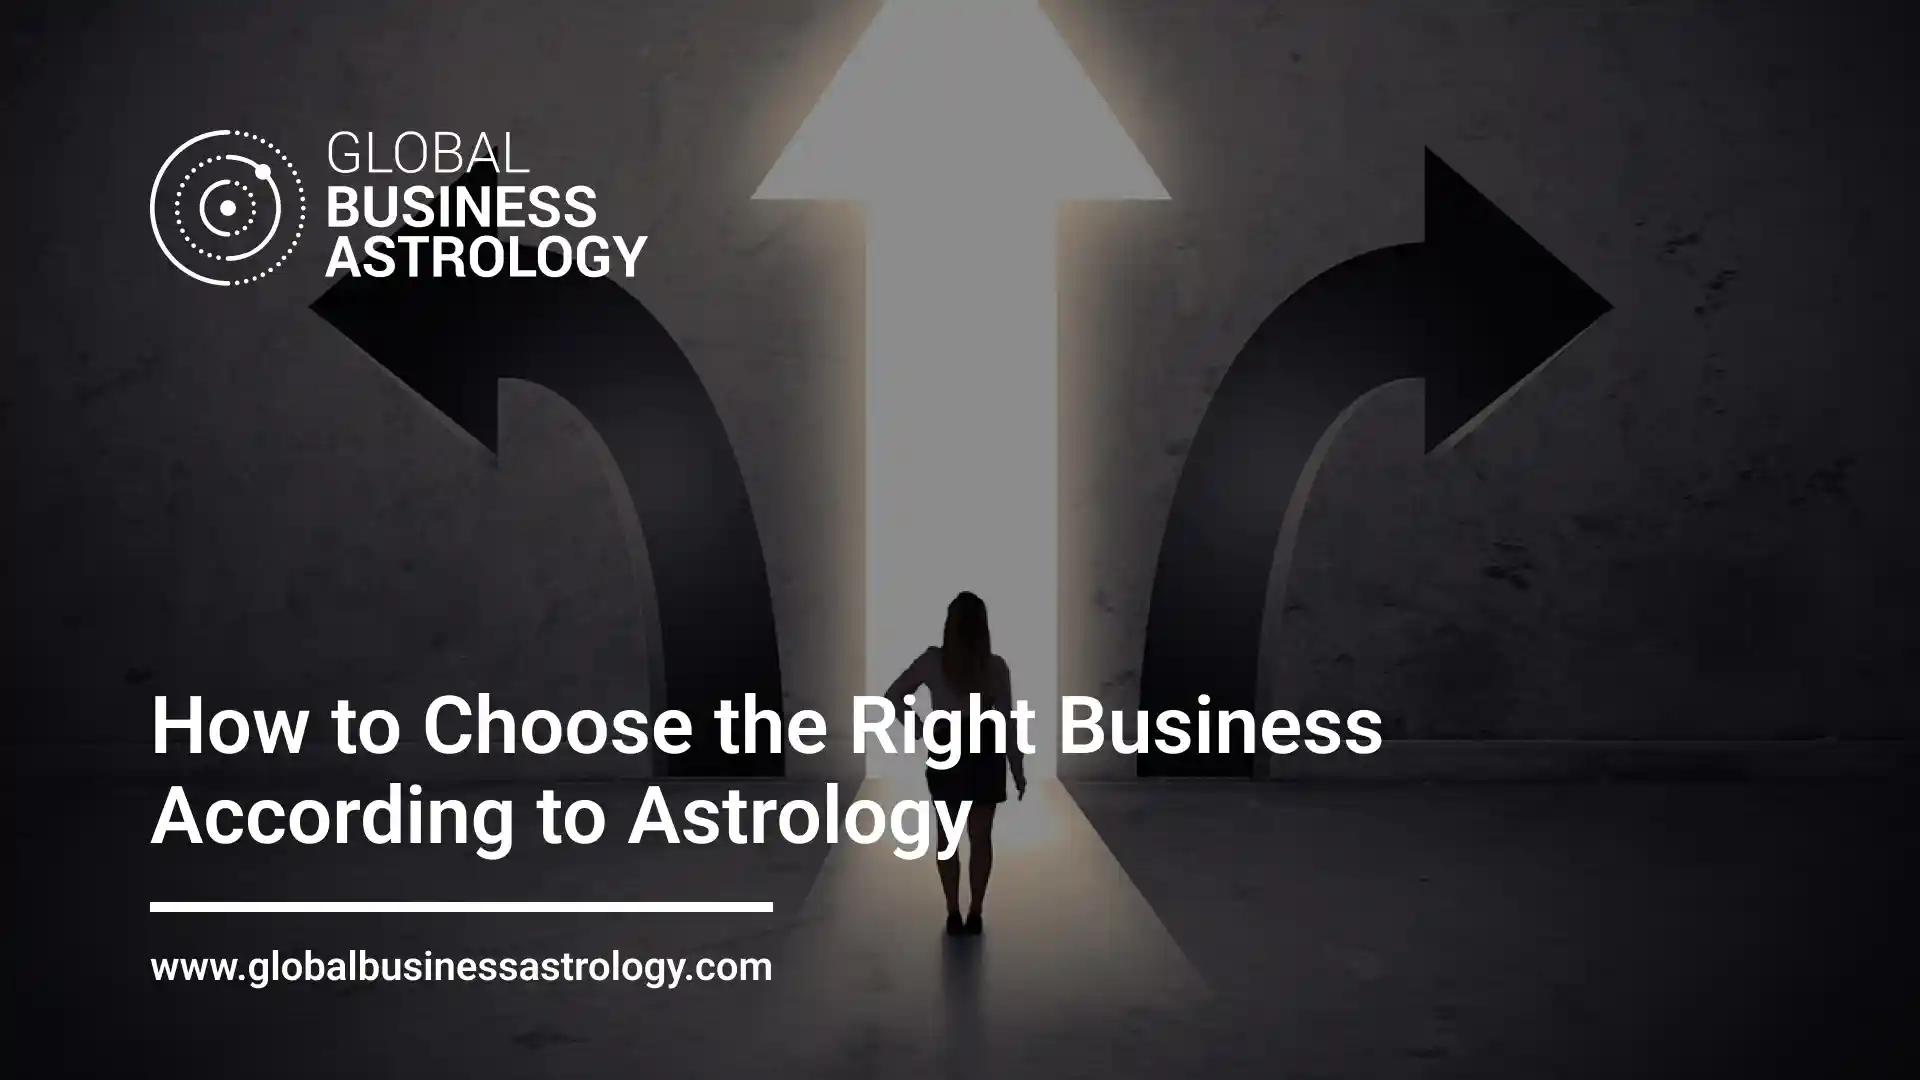 How to Choose the Right Business According to Astrology